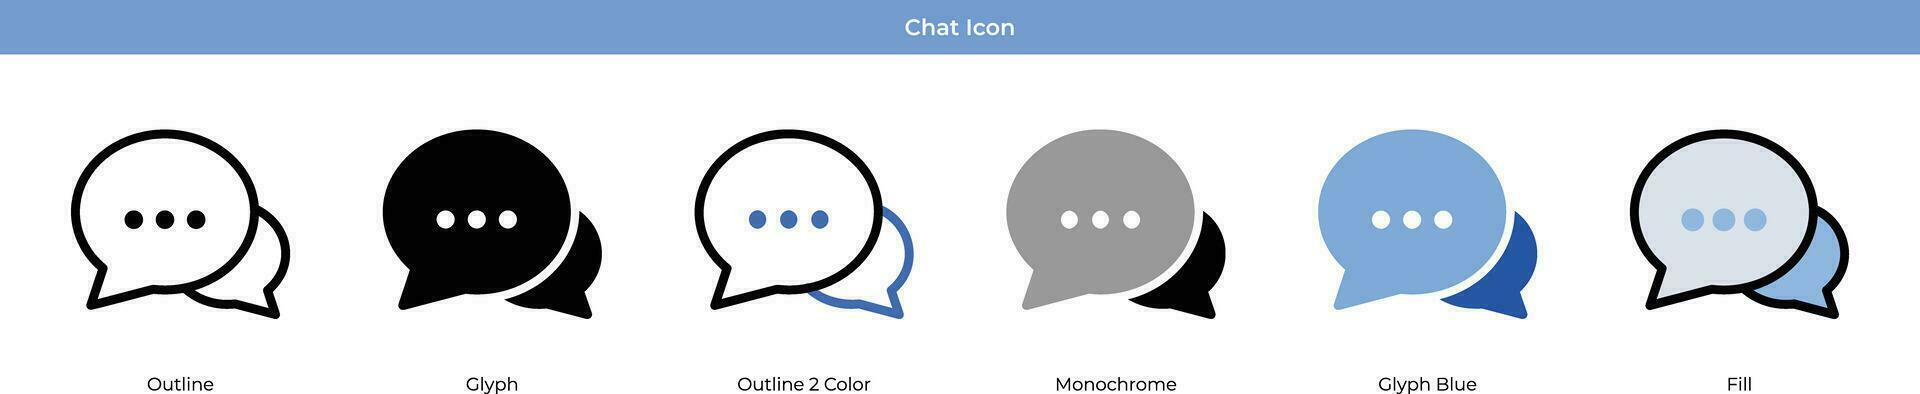 Chat Icon Set vector